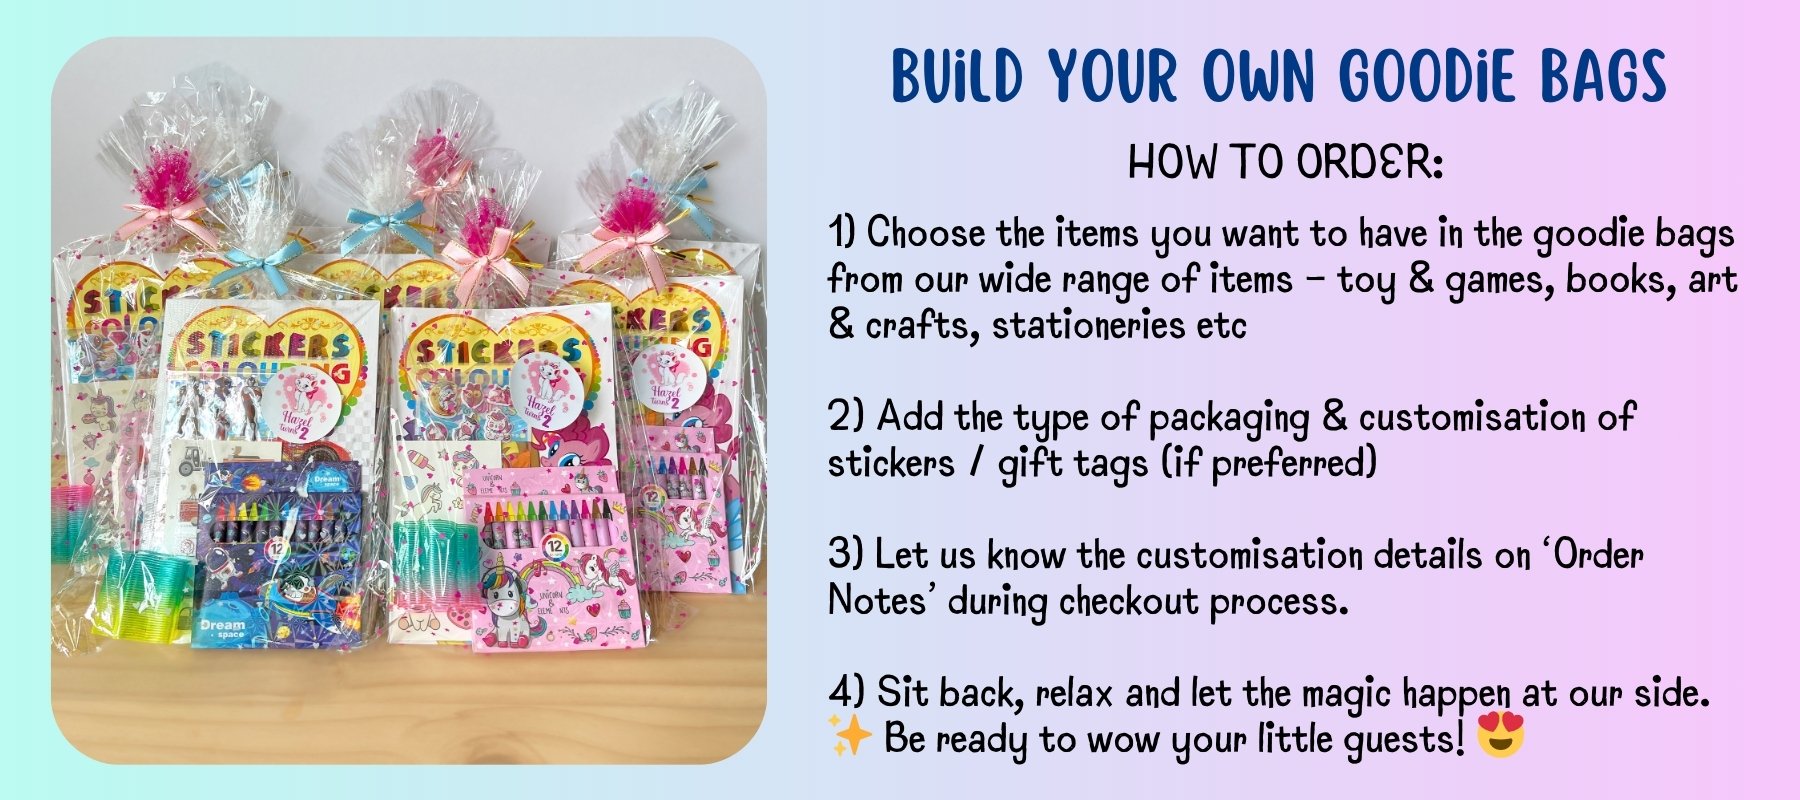 build your own goodie bags collection-Bash Party Store